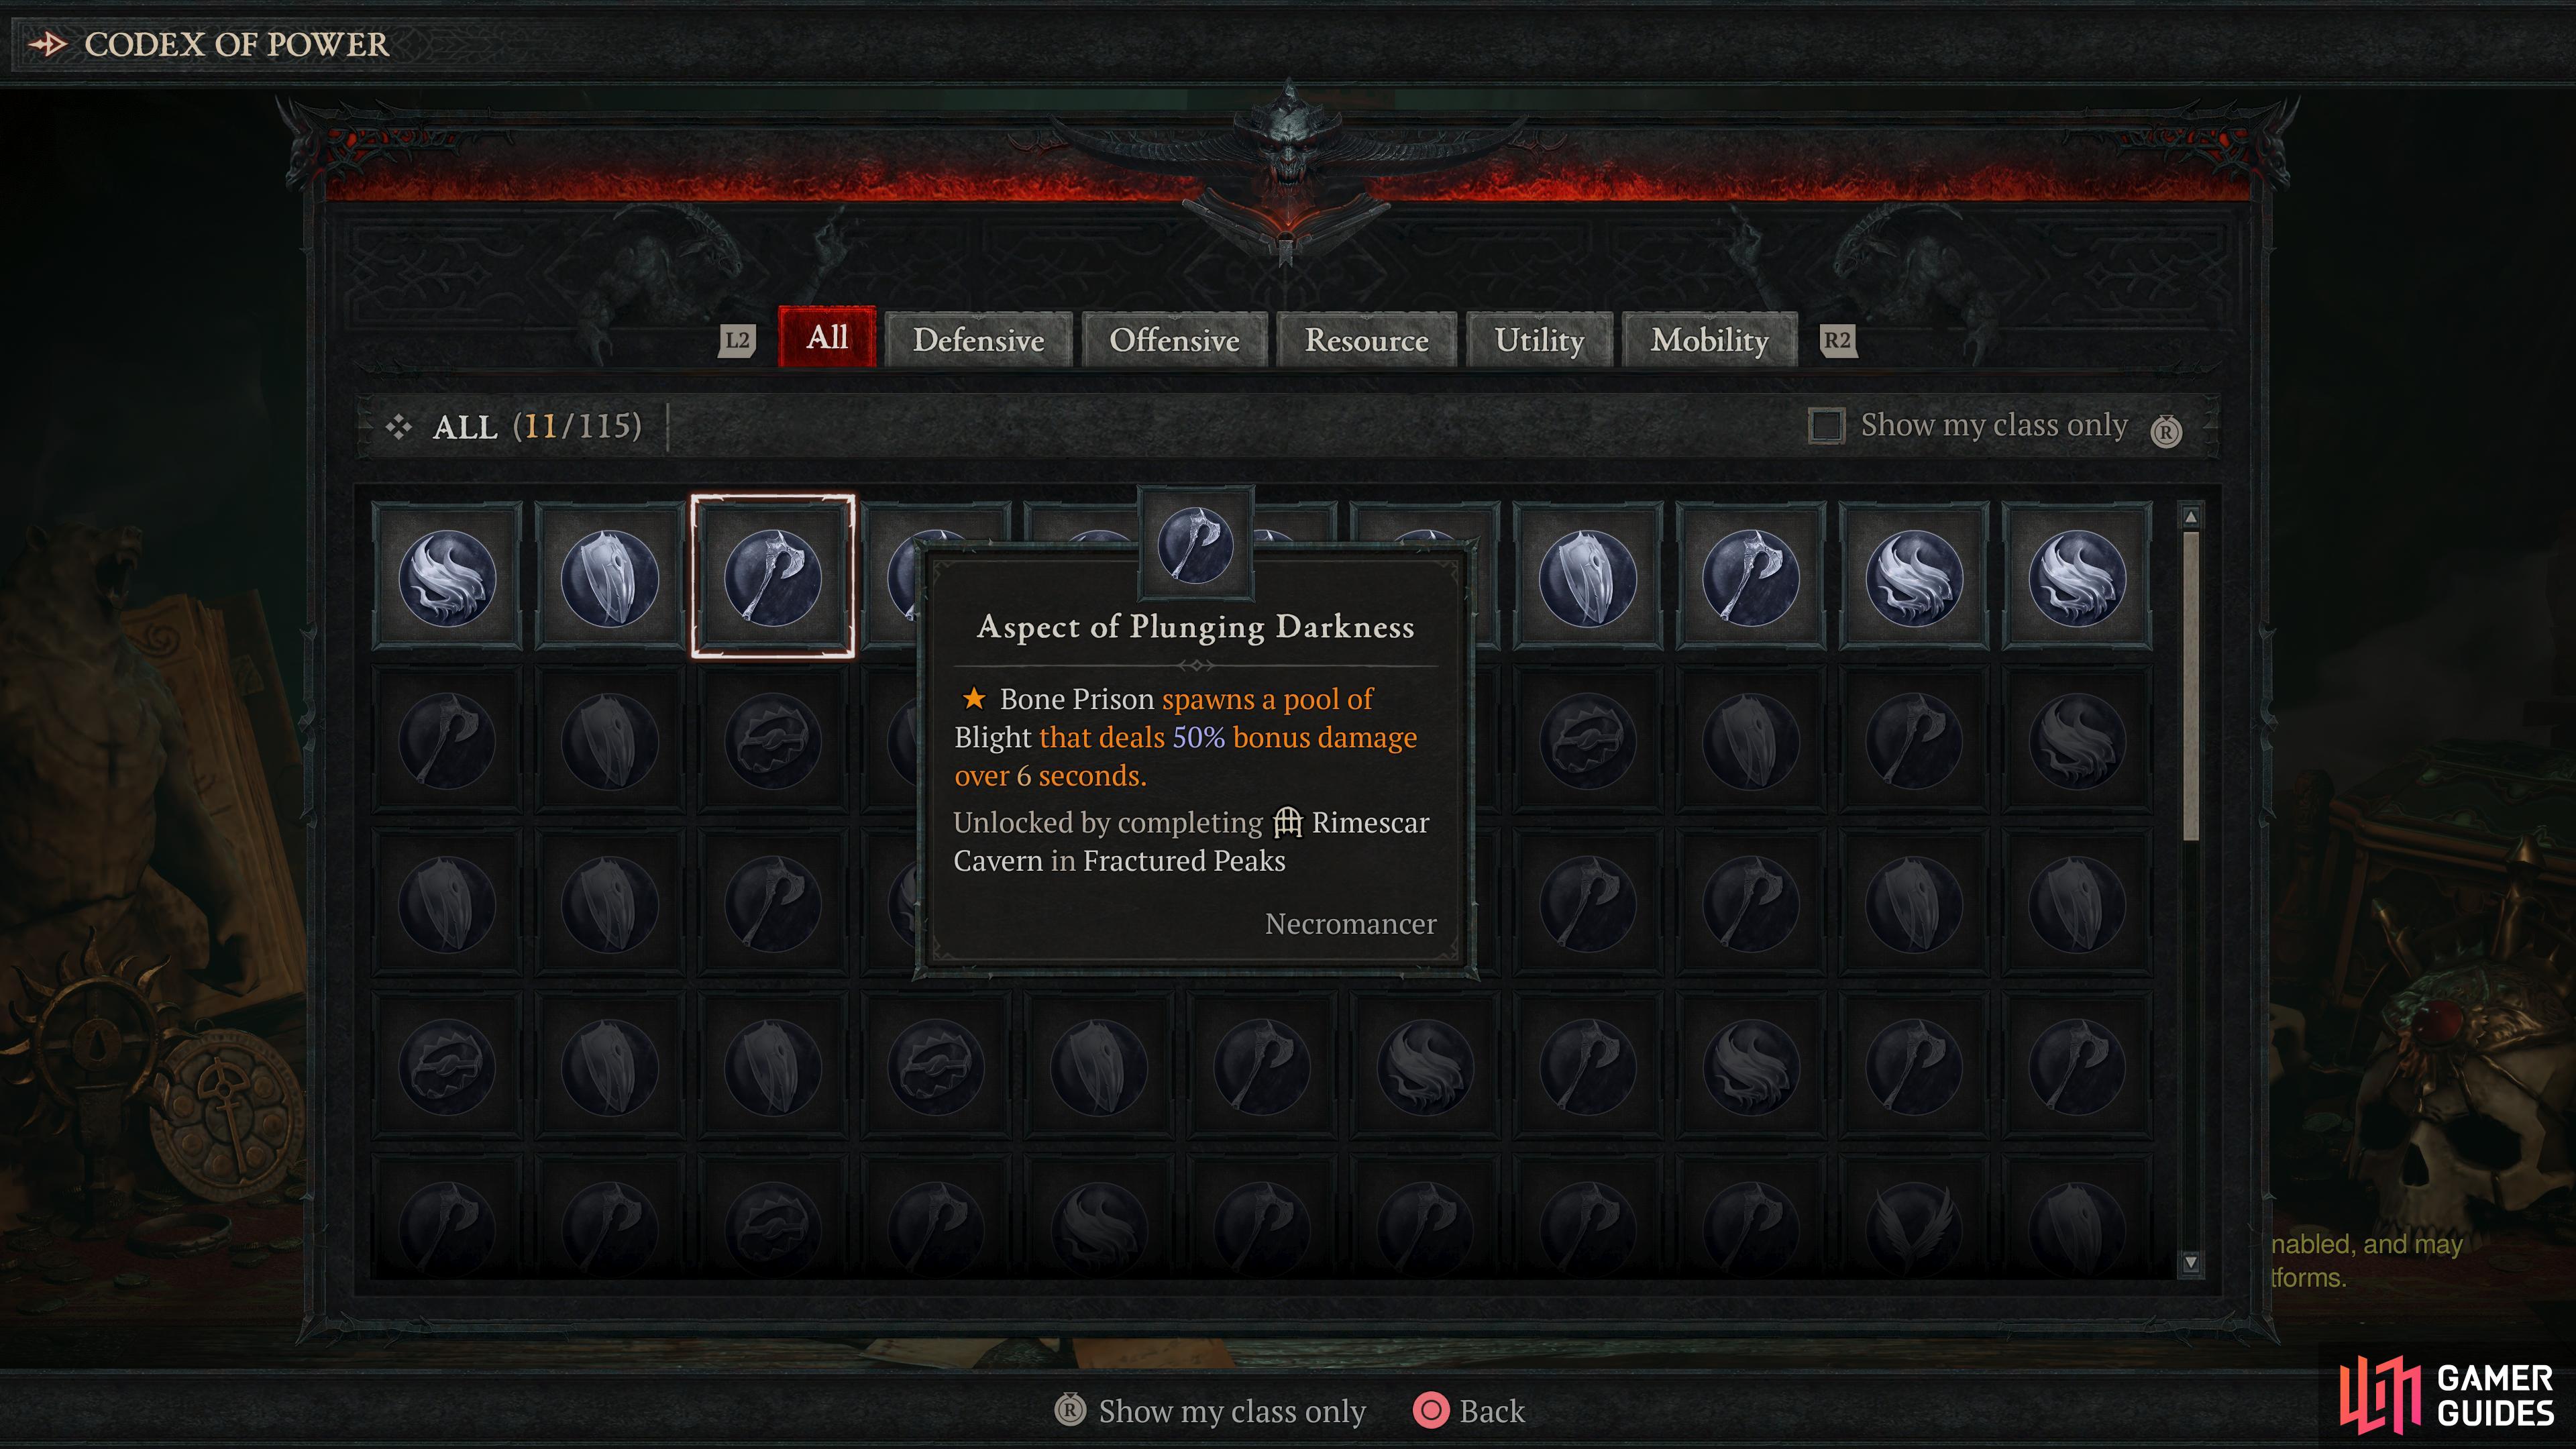 You can get Legendary Aspects from completing dungeons.